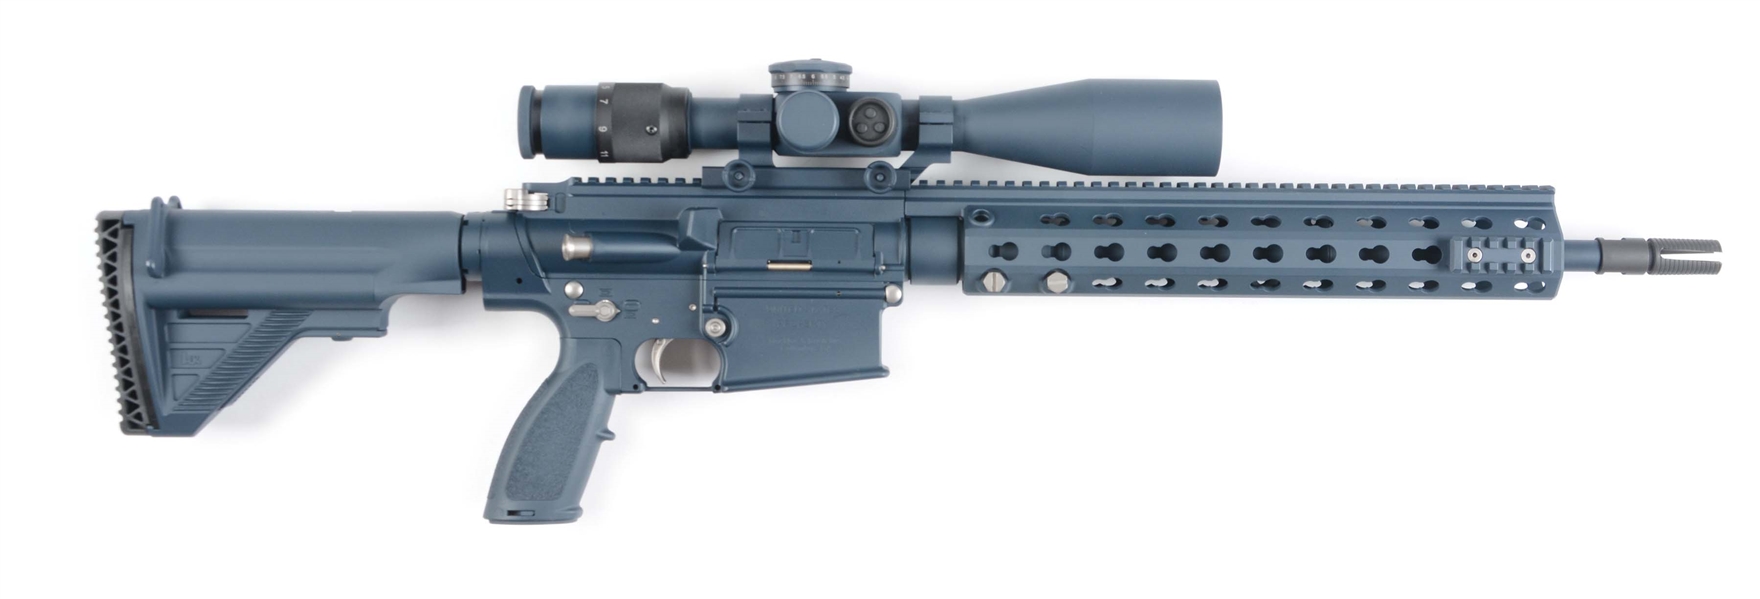 (M) FABULOUS “UNITED STATES PROPERTY” MARKED HECKLER & KOCH MR762A1 SPECIAL BLUE NAVY .308 SEMI-AUTOMATIC RIFLE WITH U.S. OPTICS SCOPE IN SOFT CASE